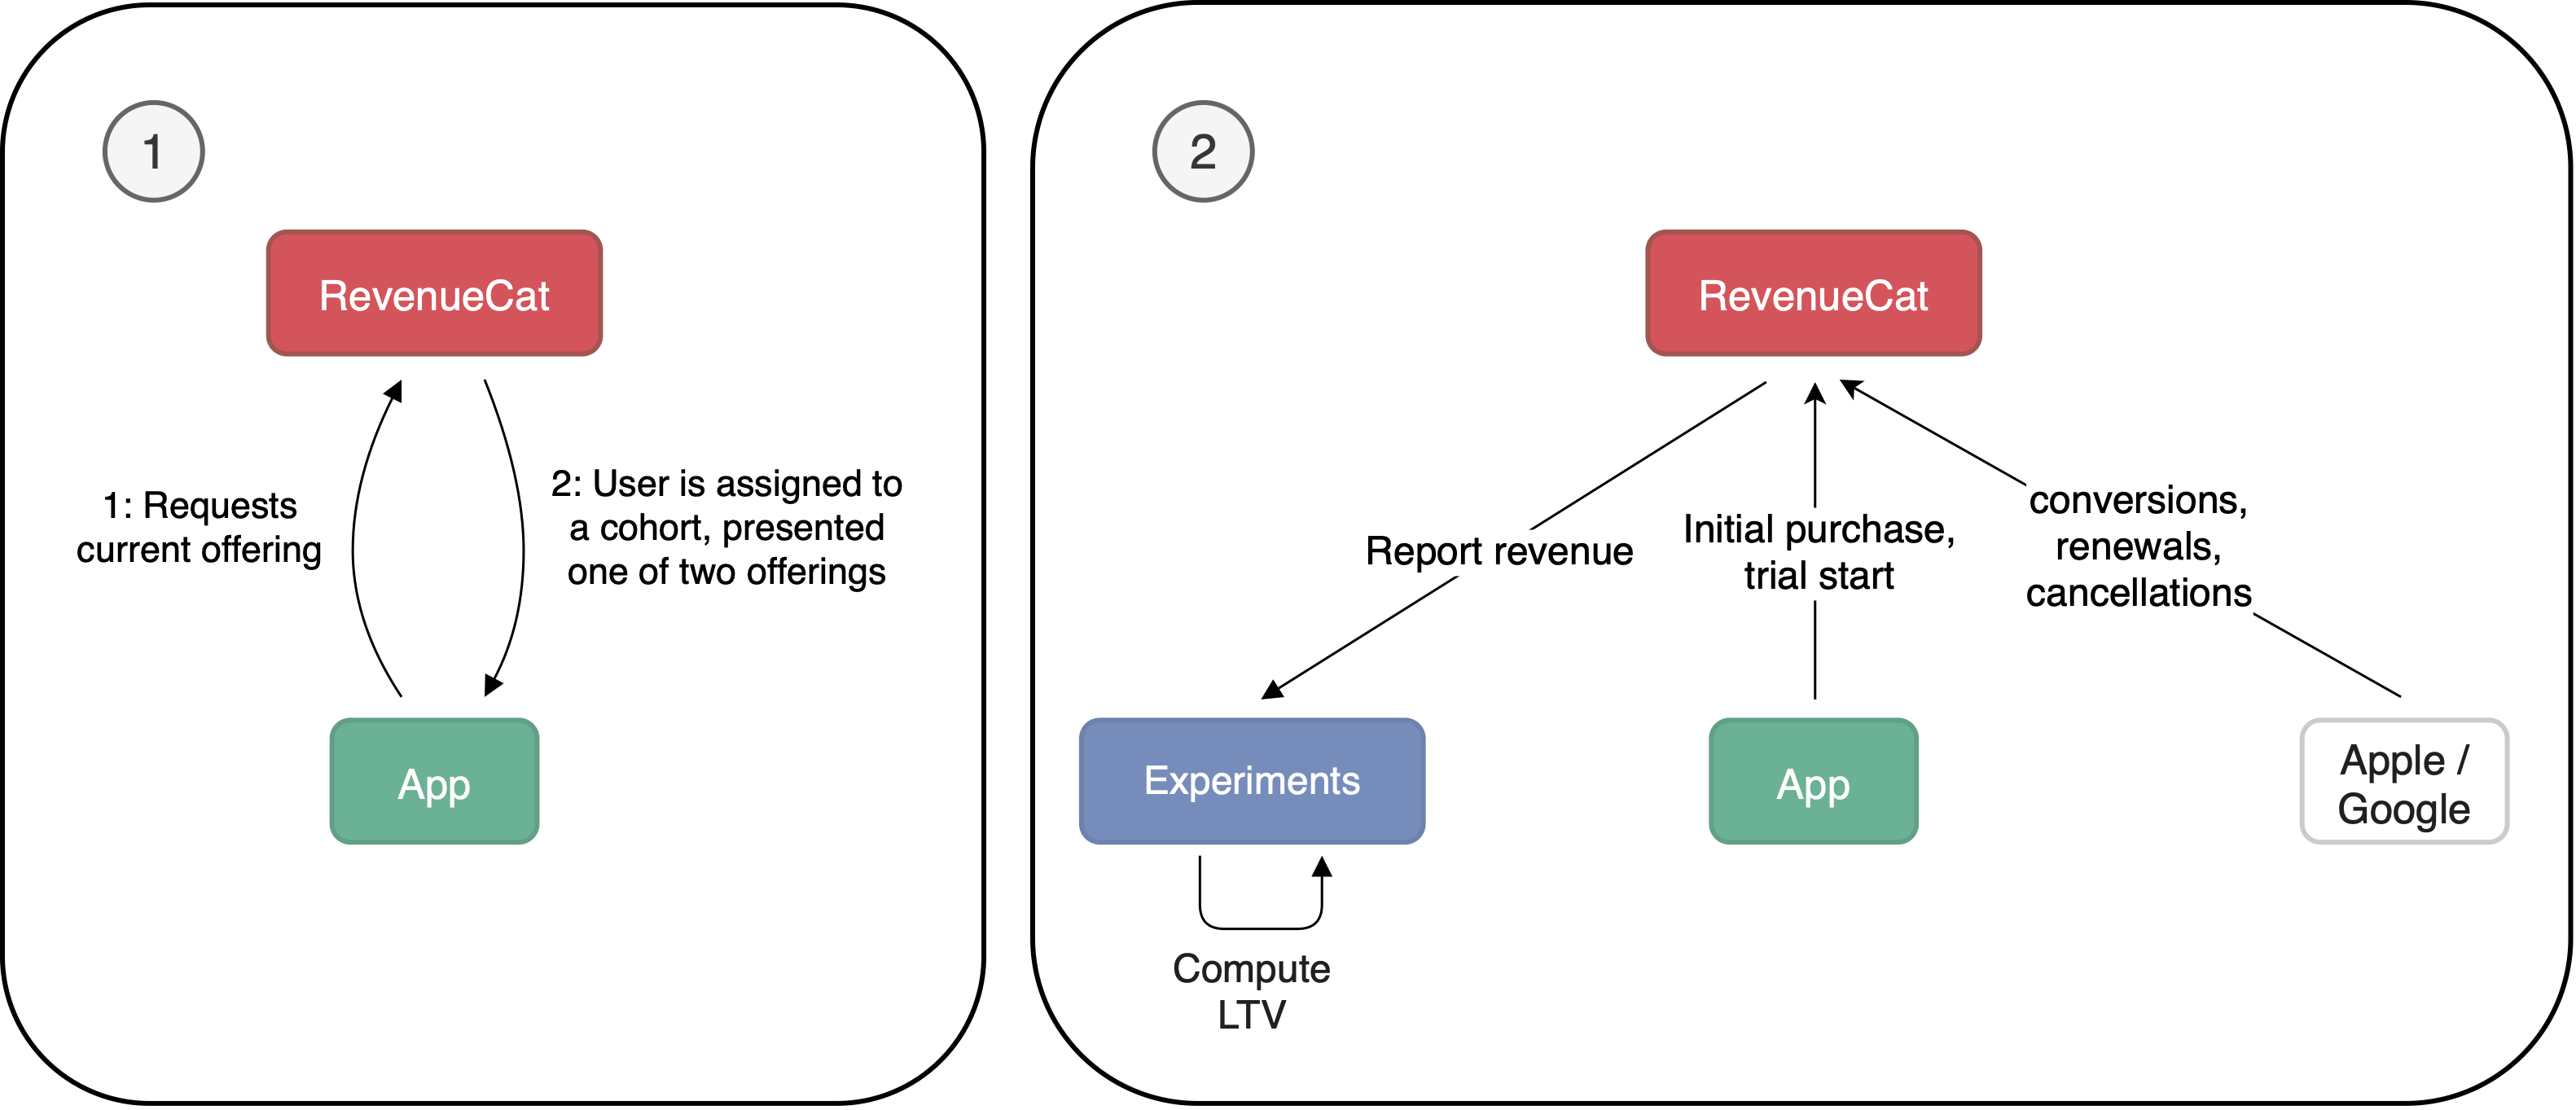 First, RevenueCat will randomly assign users to a cohort where they will see only of the two offerings in the experiment when the app requests the current offering. If the user makes an initial purchase or starts a trial, RevenueCat will continually incorporate the following trial conversion, renewals, and cancellations into the LTV model.